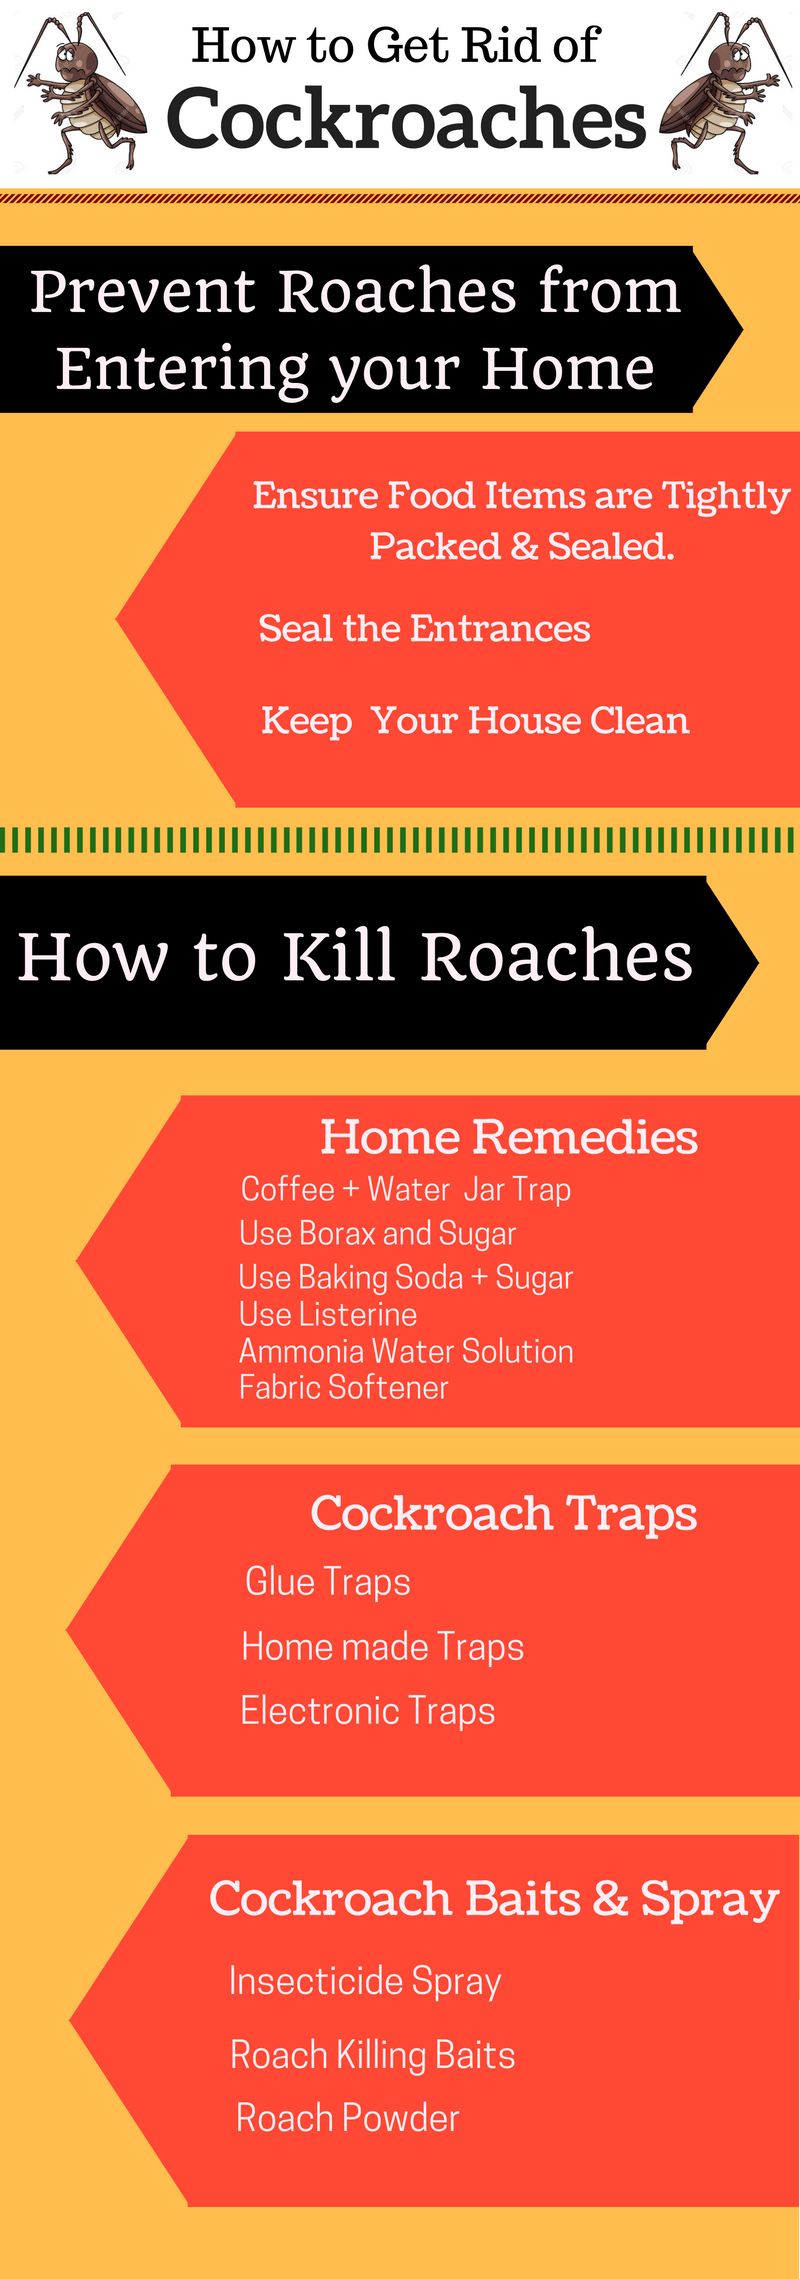 get-rid-of-roaches